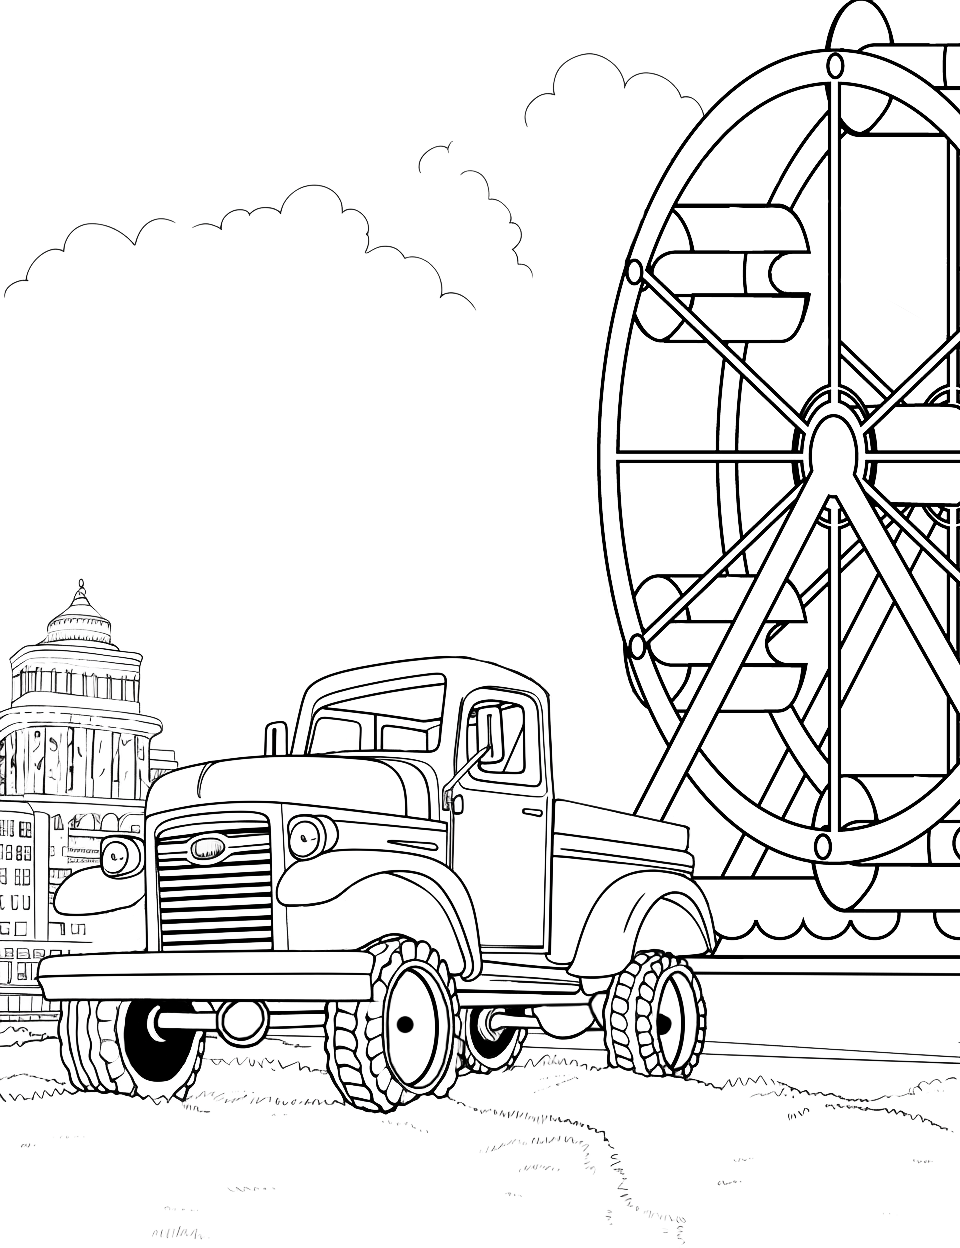 Carnival Cruise Monster Truck Coloring Page - An old School Monster truck in front of a Ferris wheel.